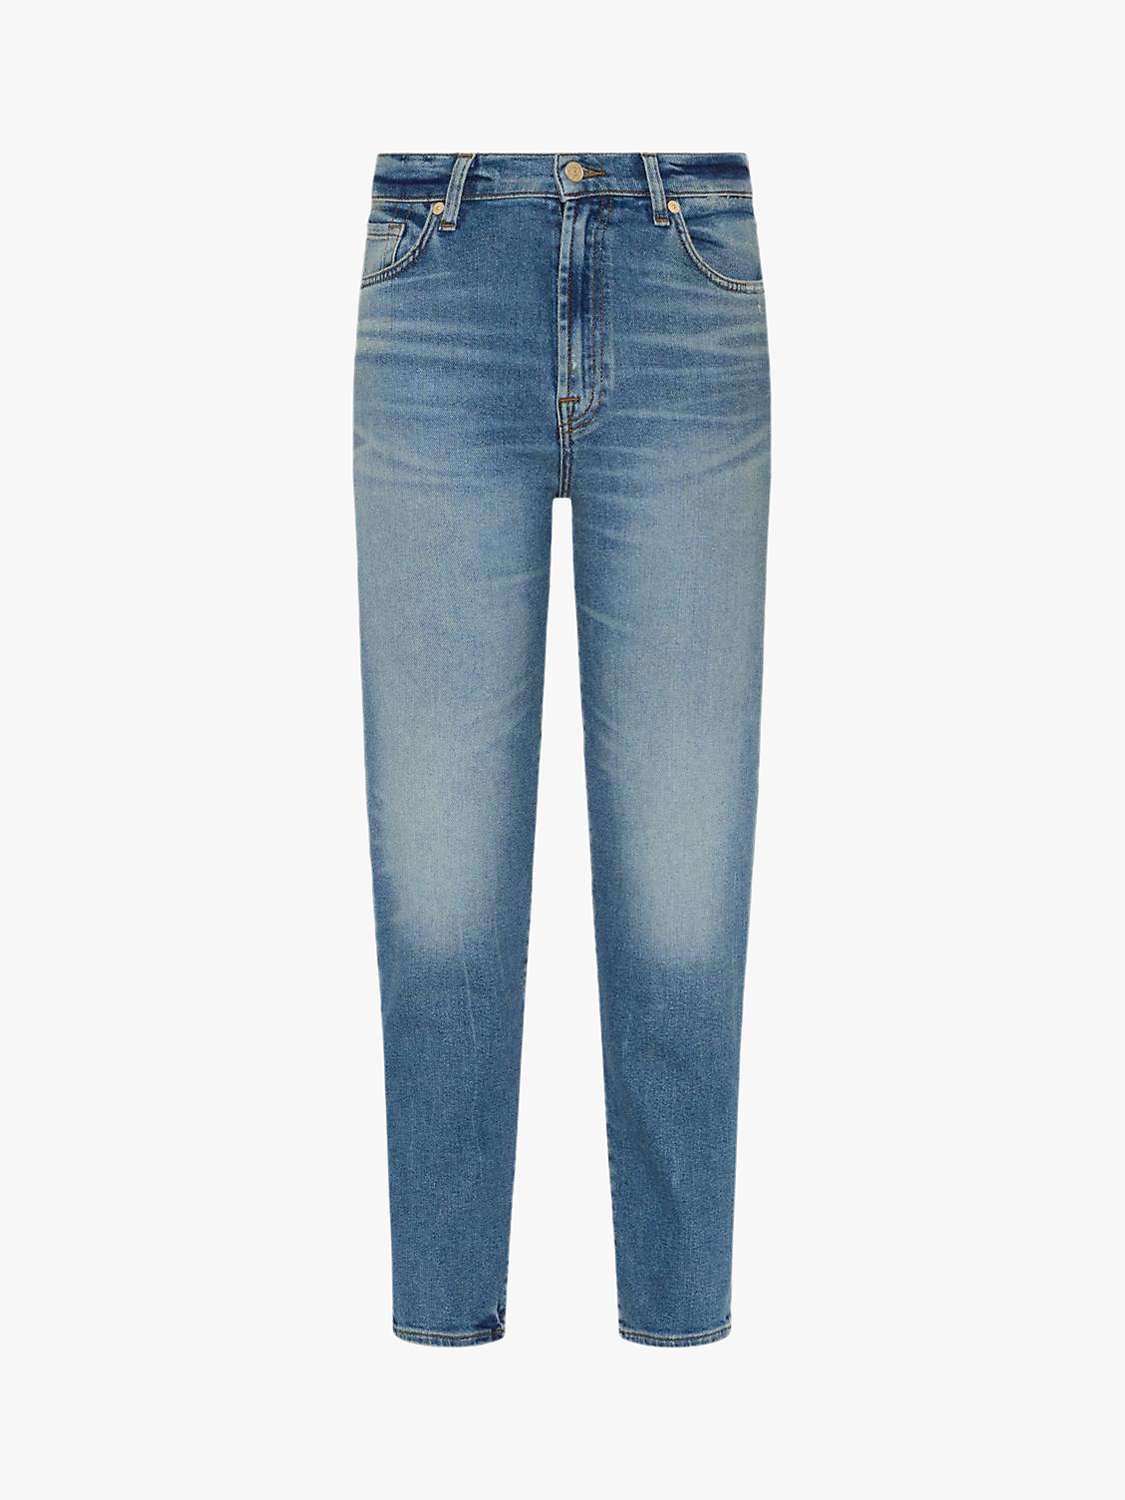 Buy 7 For All Mankind Malia Luxe Vintage Tapered Leg Jeans, Mid Blue Online at johnlewis.com